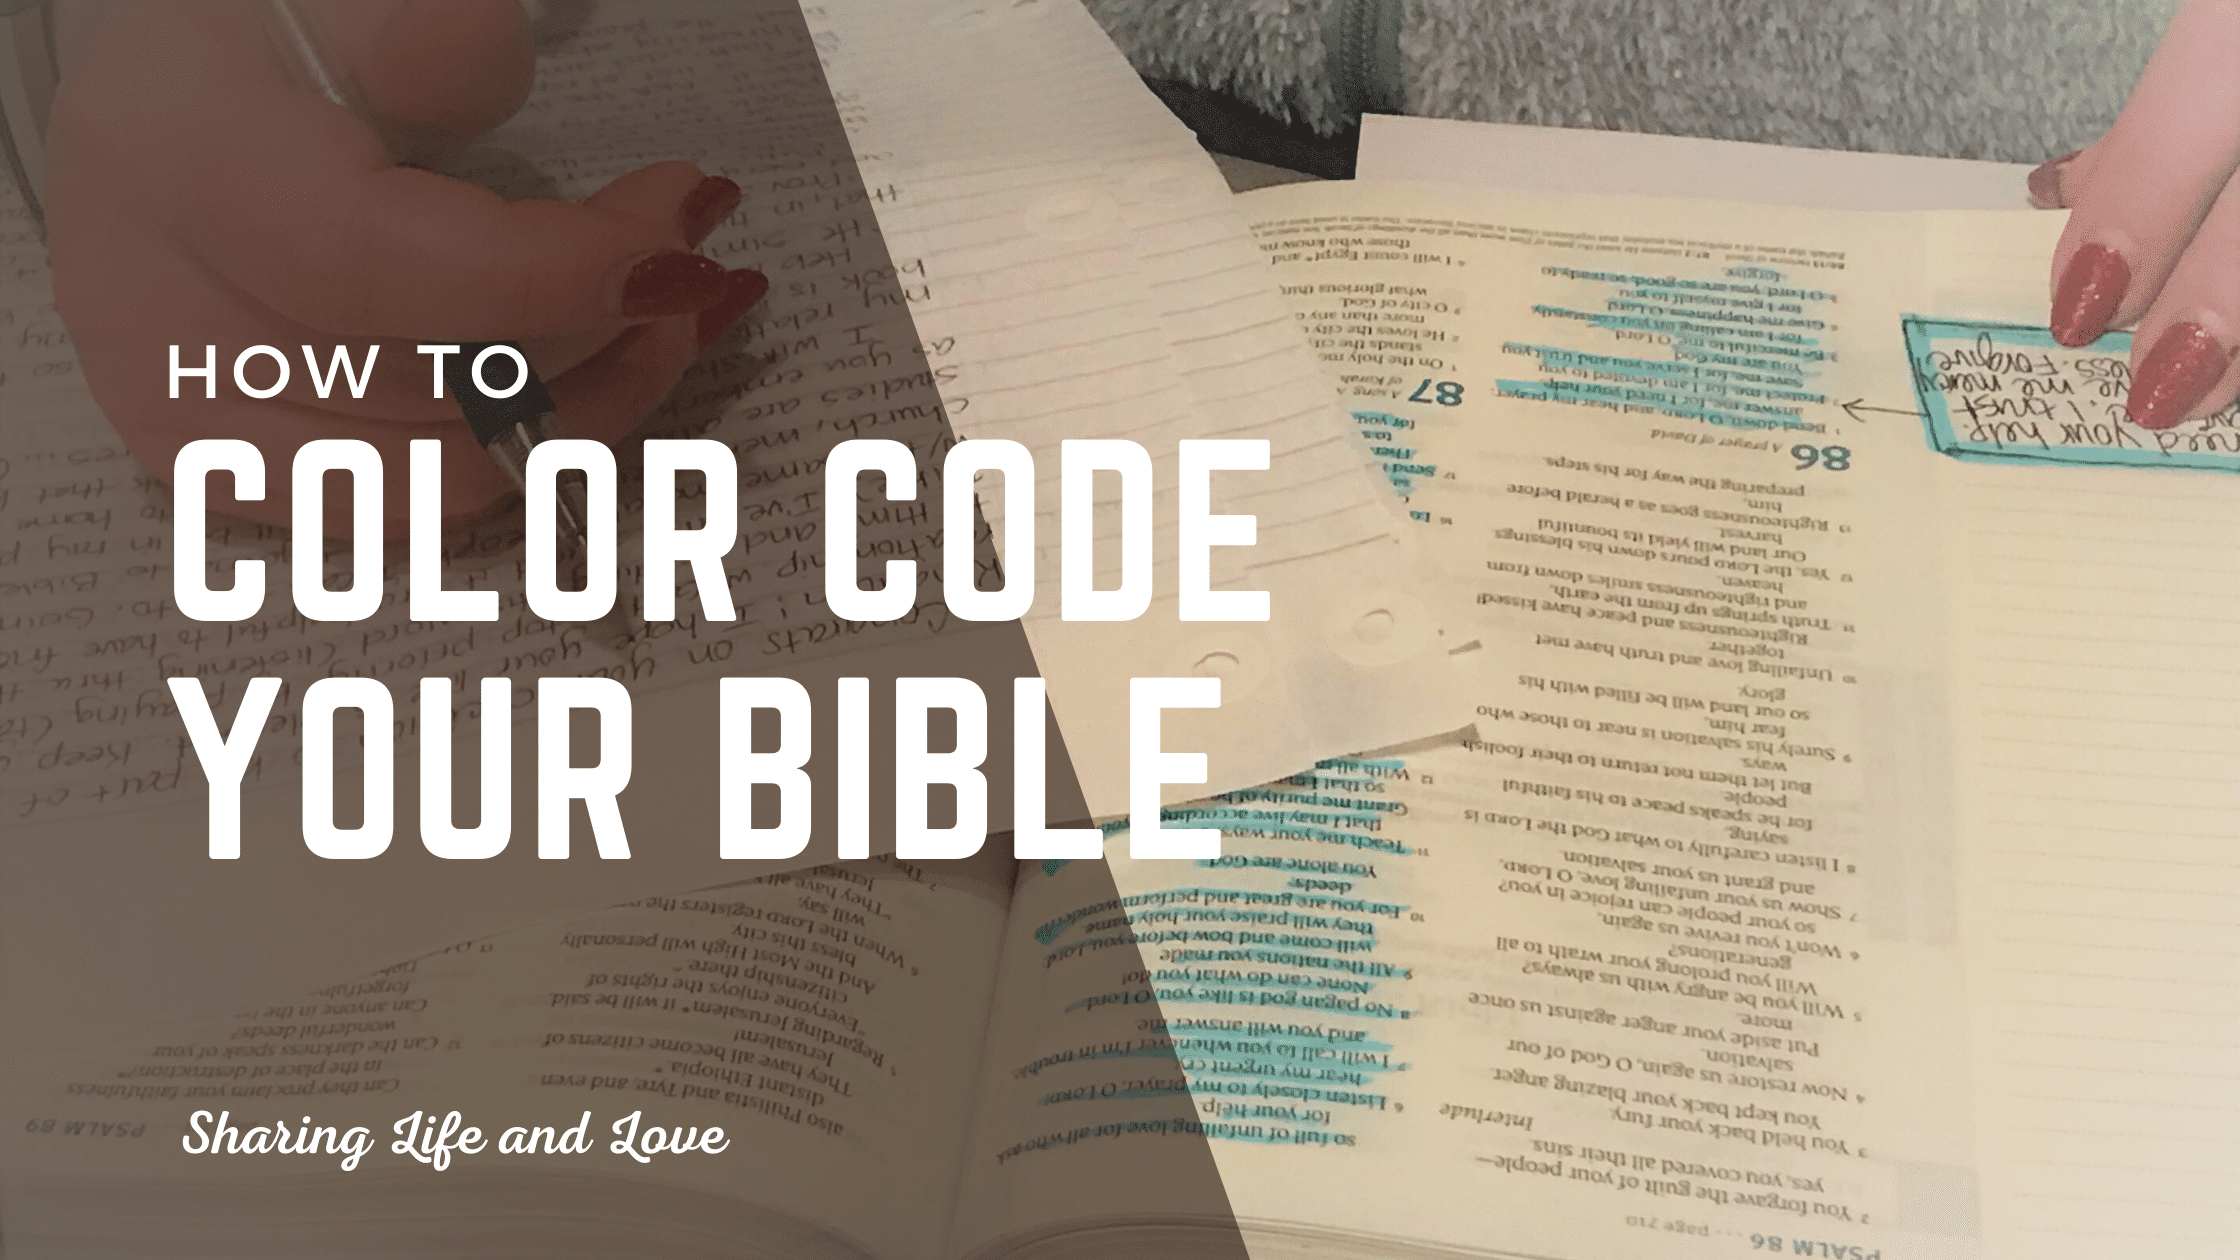 https://sharinglifeandlove.com/wp-content/uploads/2022/03/101-how-to-color-code-your-bible-1.png